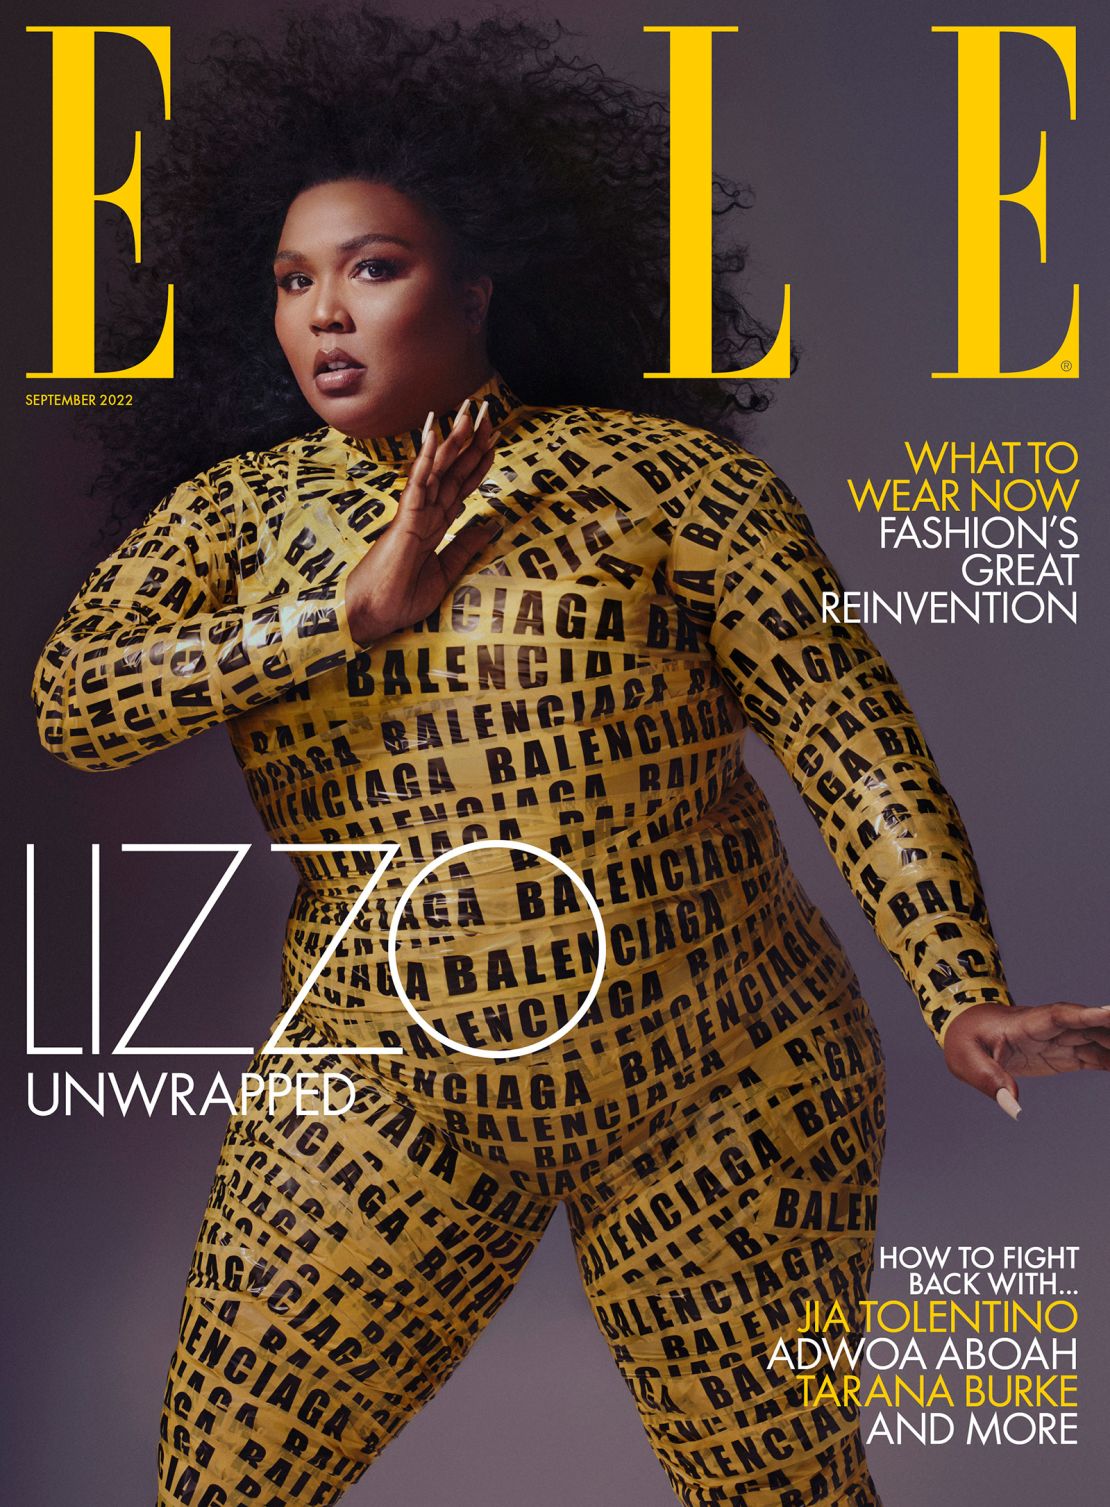 Lizzo on the cover of Elle UK.